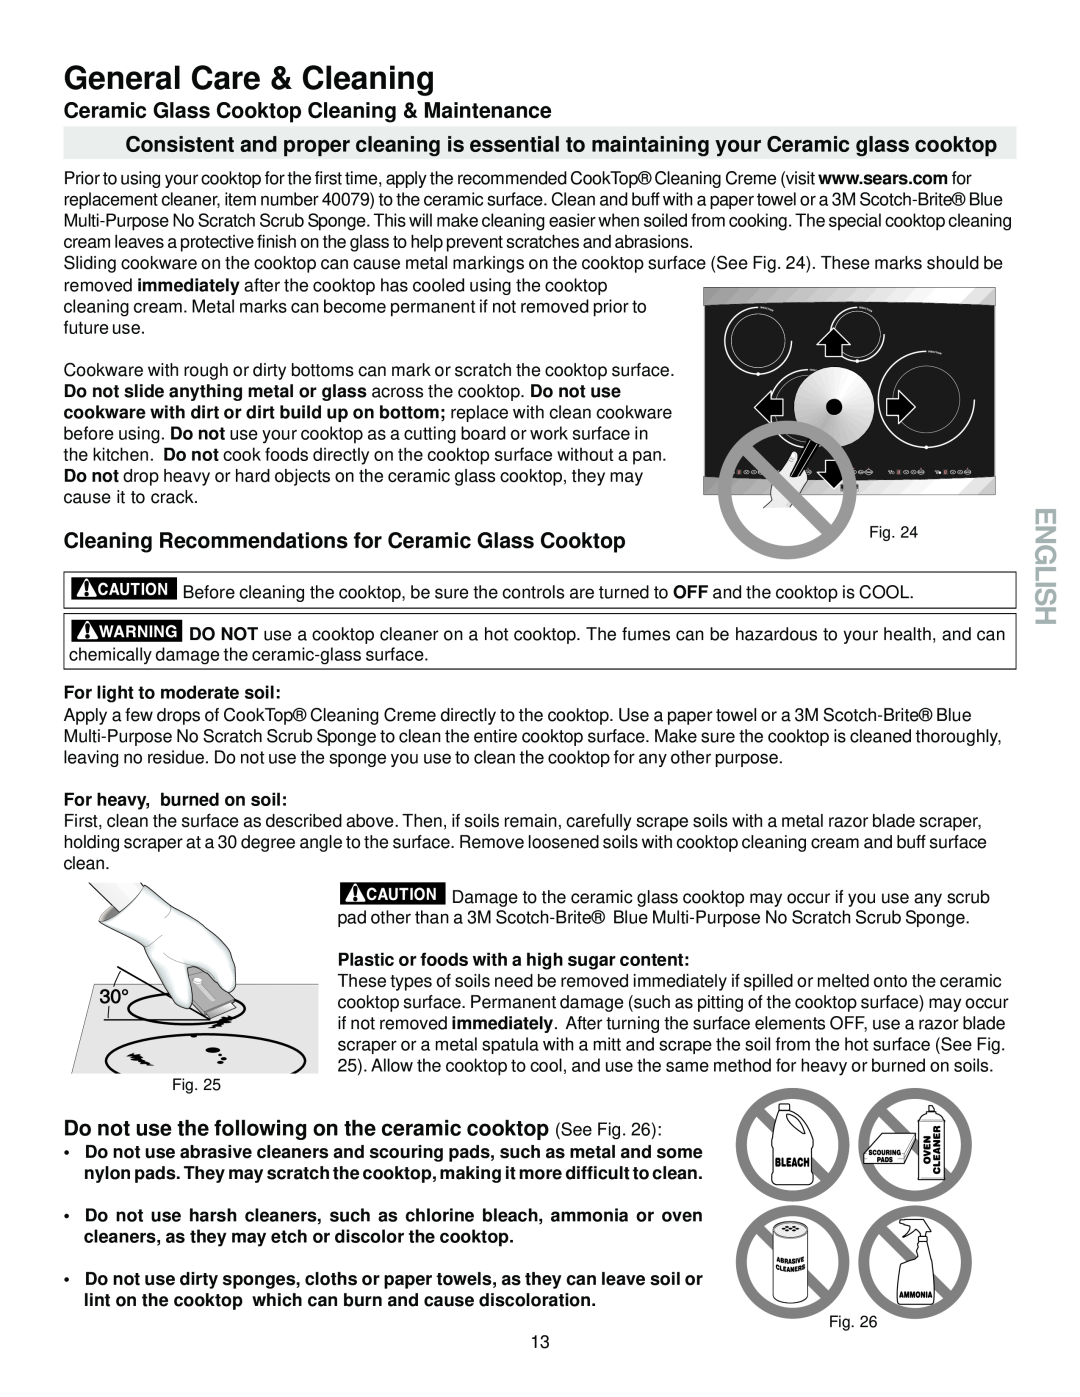 Sears 790.428 manual General Care & Cleaning, English, Ceramic Glass Cooktop Cleaning & Maintenance 